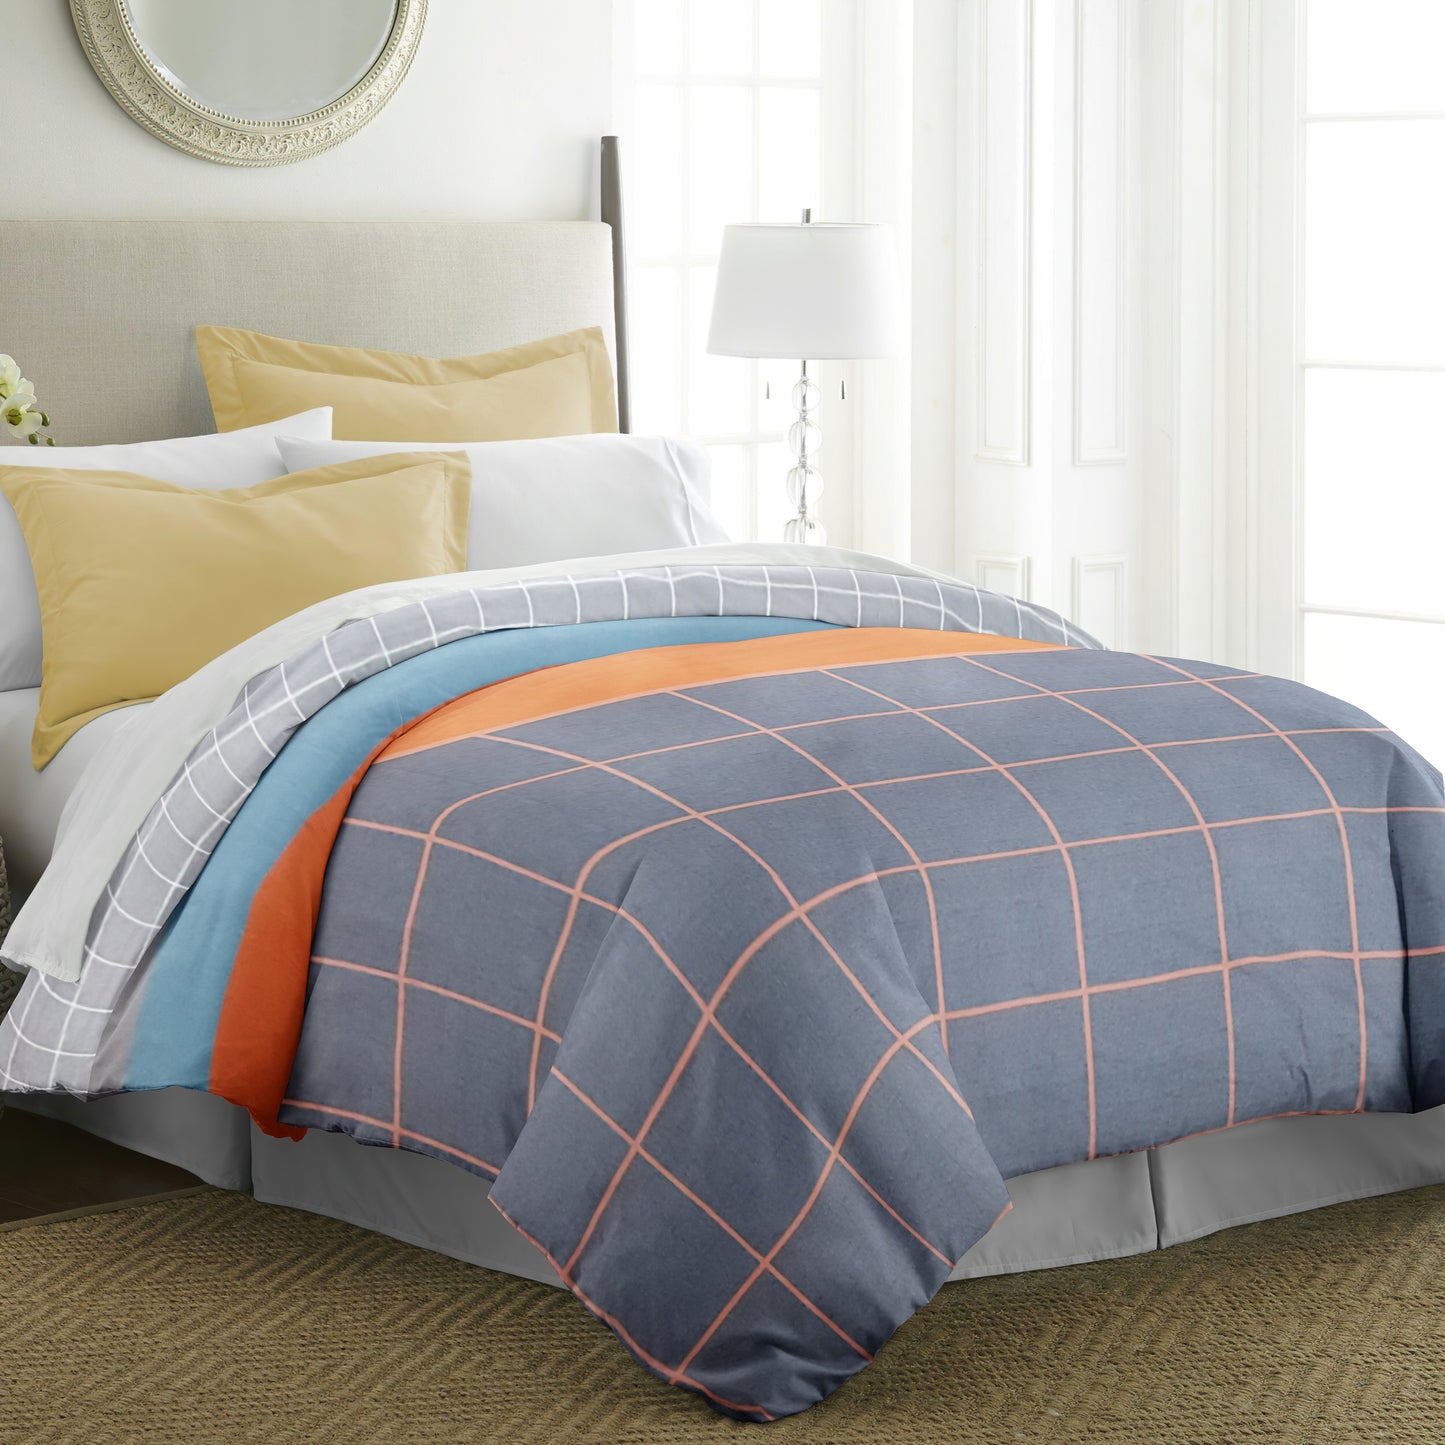 Duvet/Quilt Covers Soft Plush Pure Cotton Printed Checks on Grey